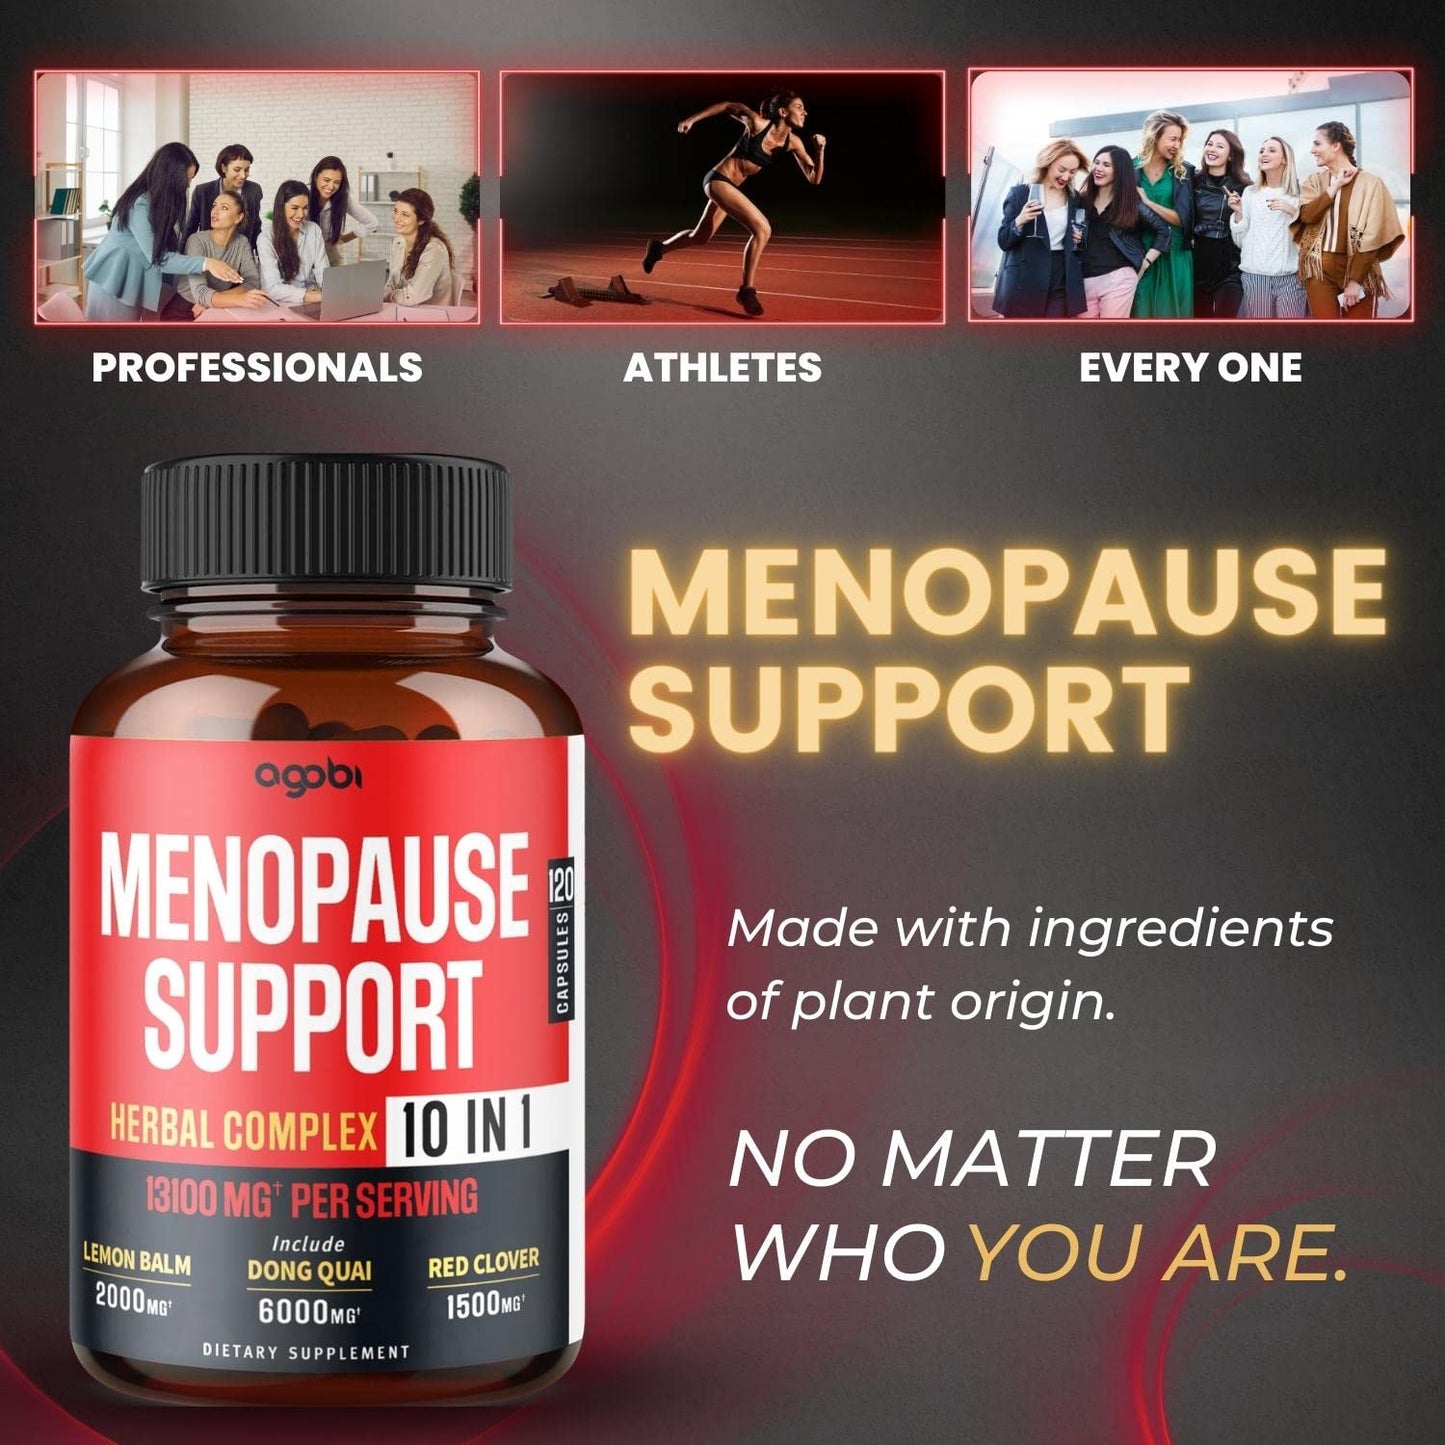 agobi Menopause Support for Women Health 13100 Mg - 10in1 with Dong Quai, Lemon Balm